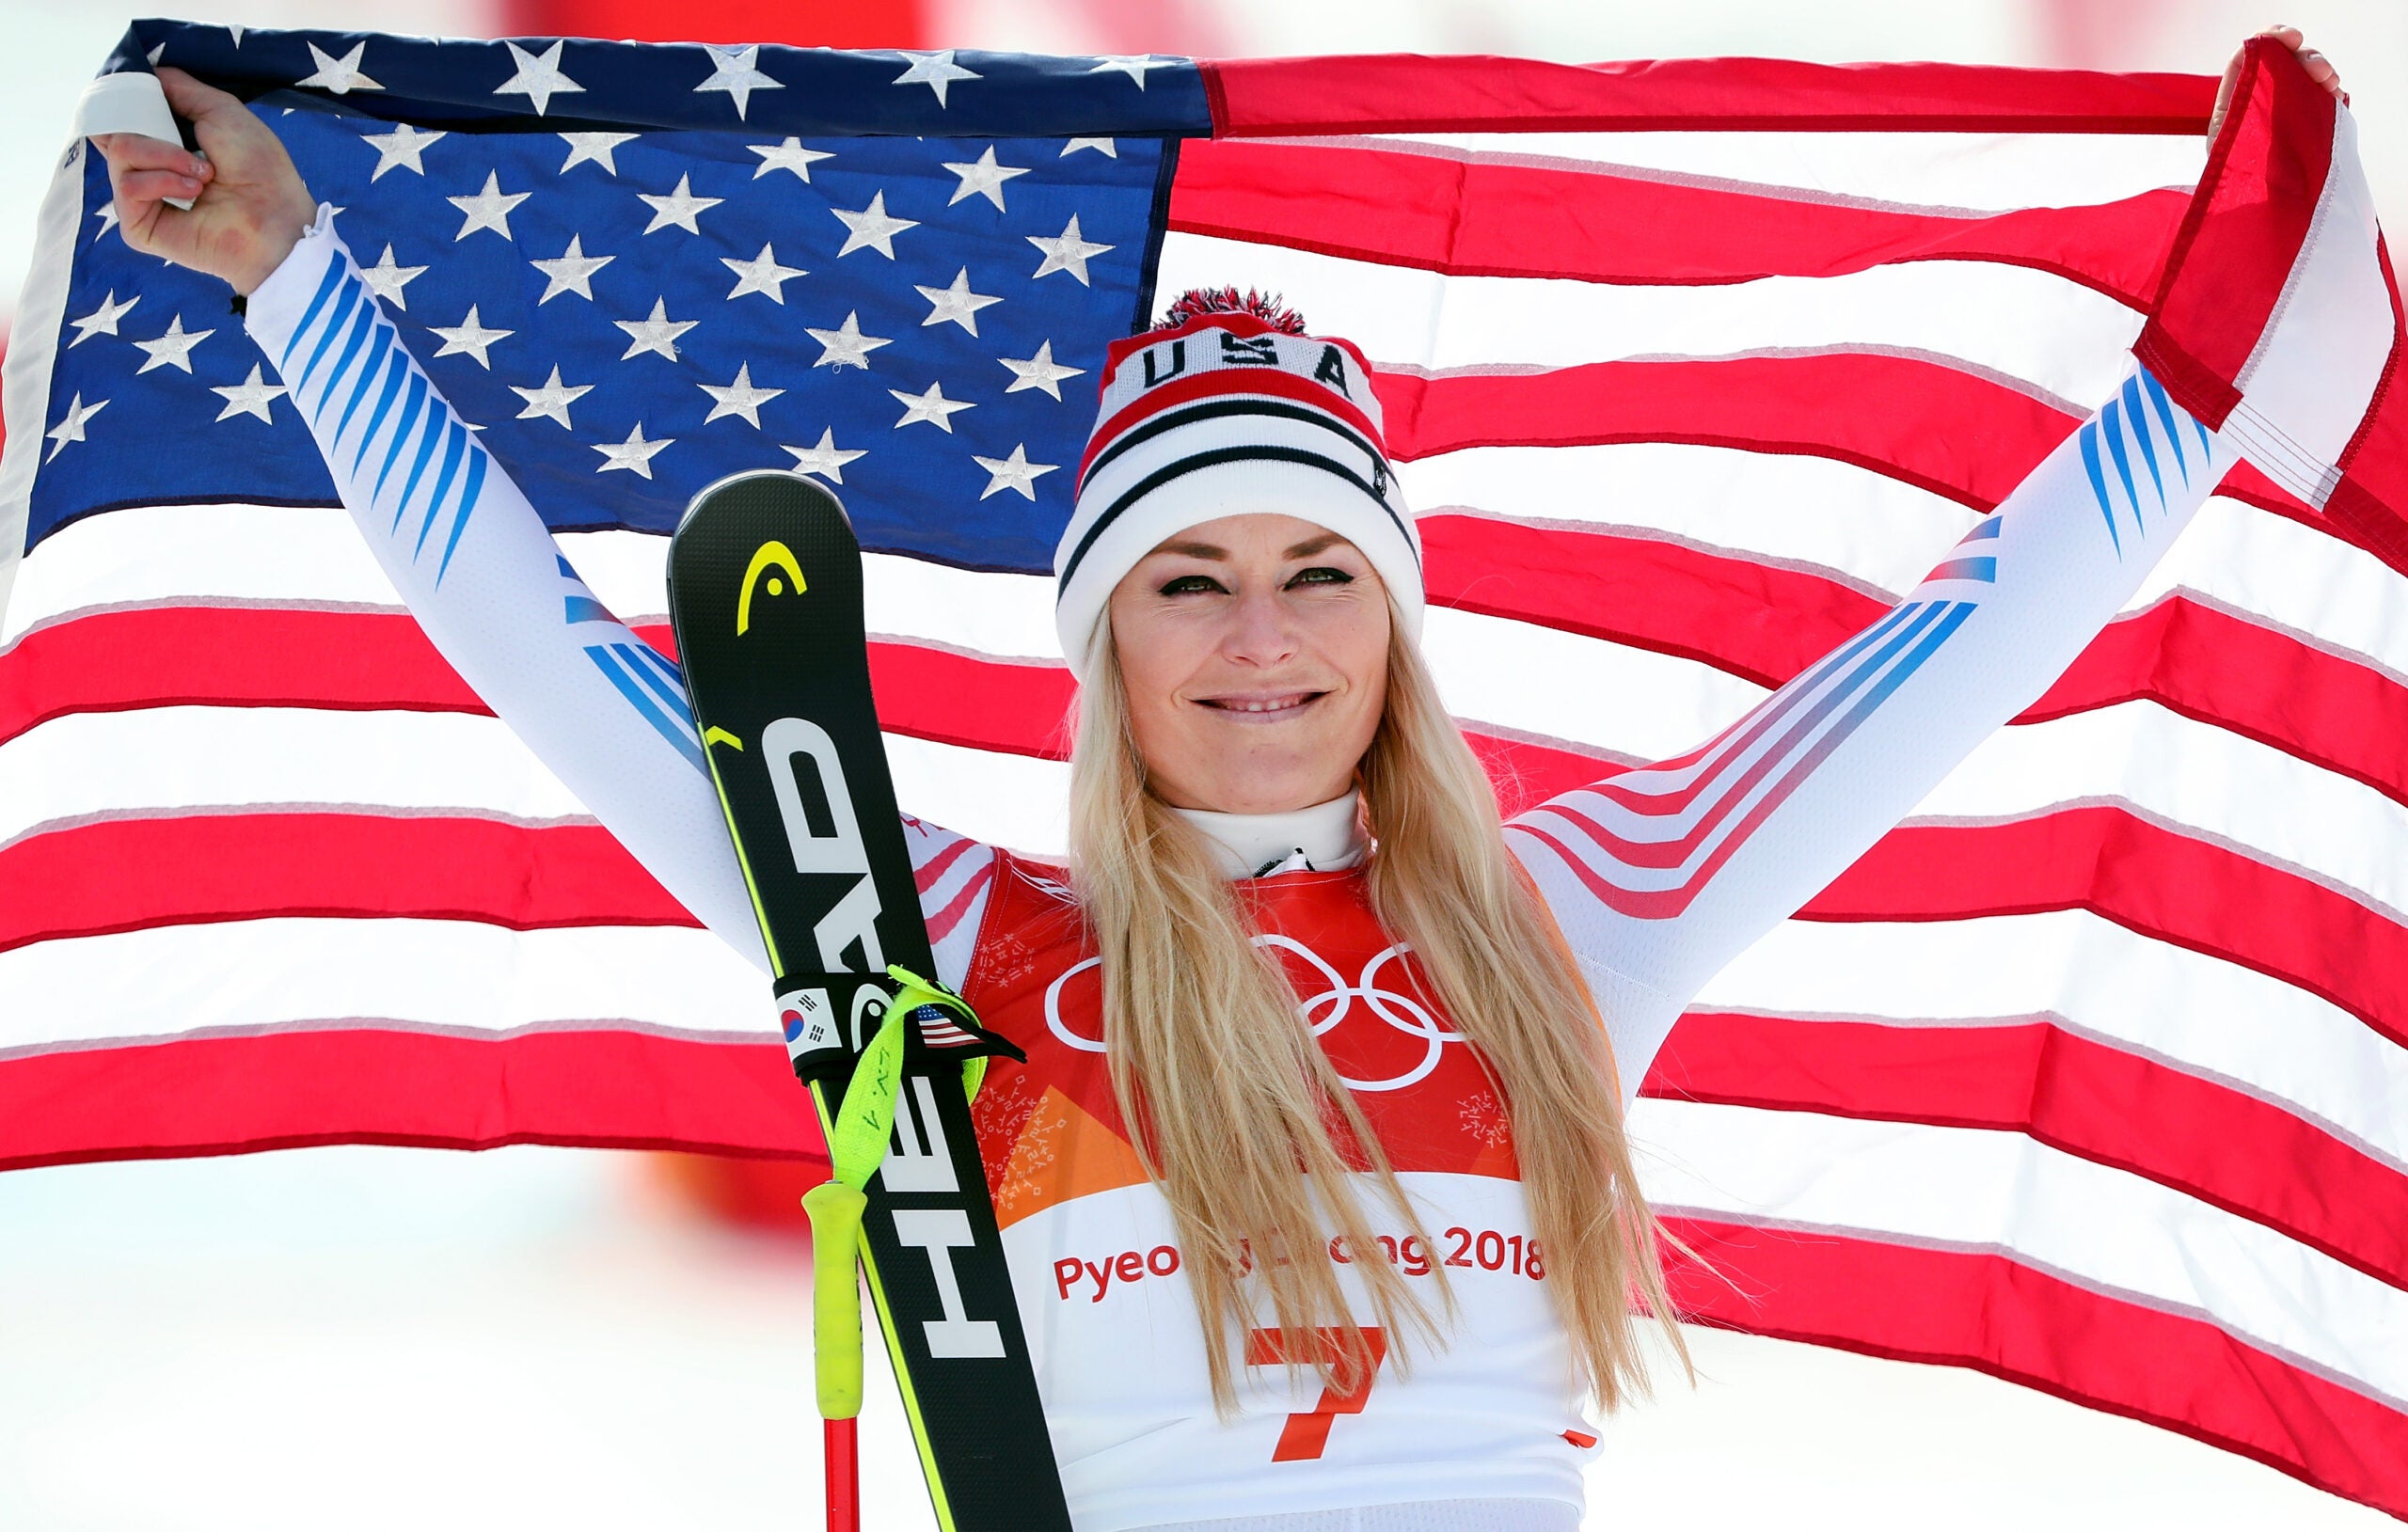 Bronze medallist Lindsey Vonn of the United States celebrates during the victory ceremony for the Ladies' Downhill on day 12 of the PyeongChang 2018 Winter Olympic Games at Jeongseon Alpine Centre on February 21, 2018 in Pyeongchang-gun, South Korea.